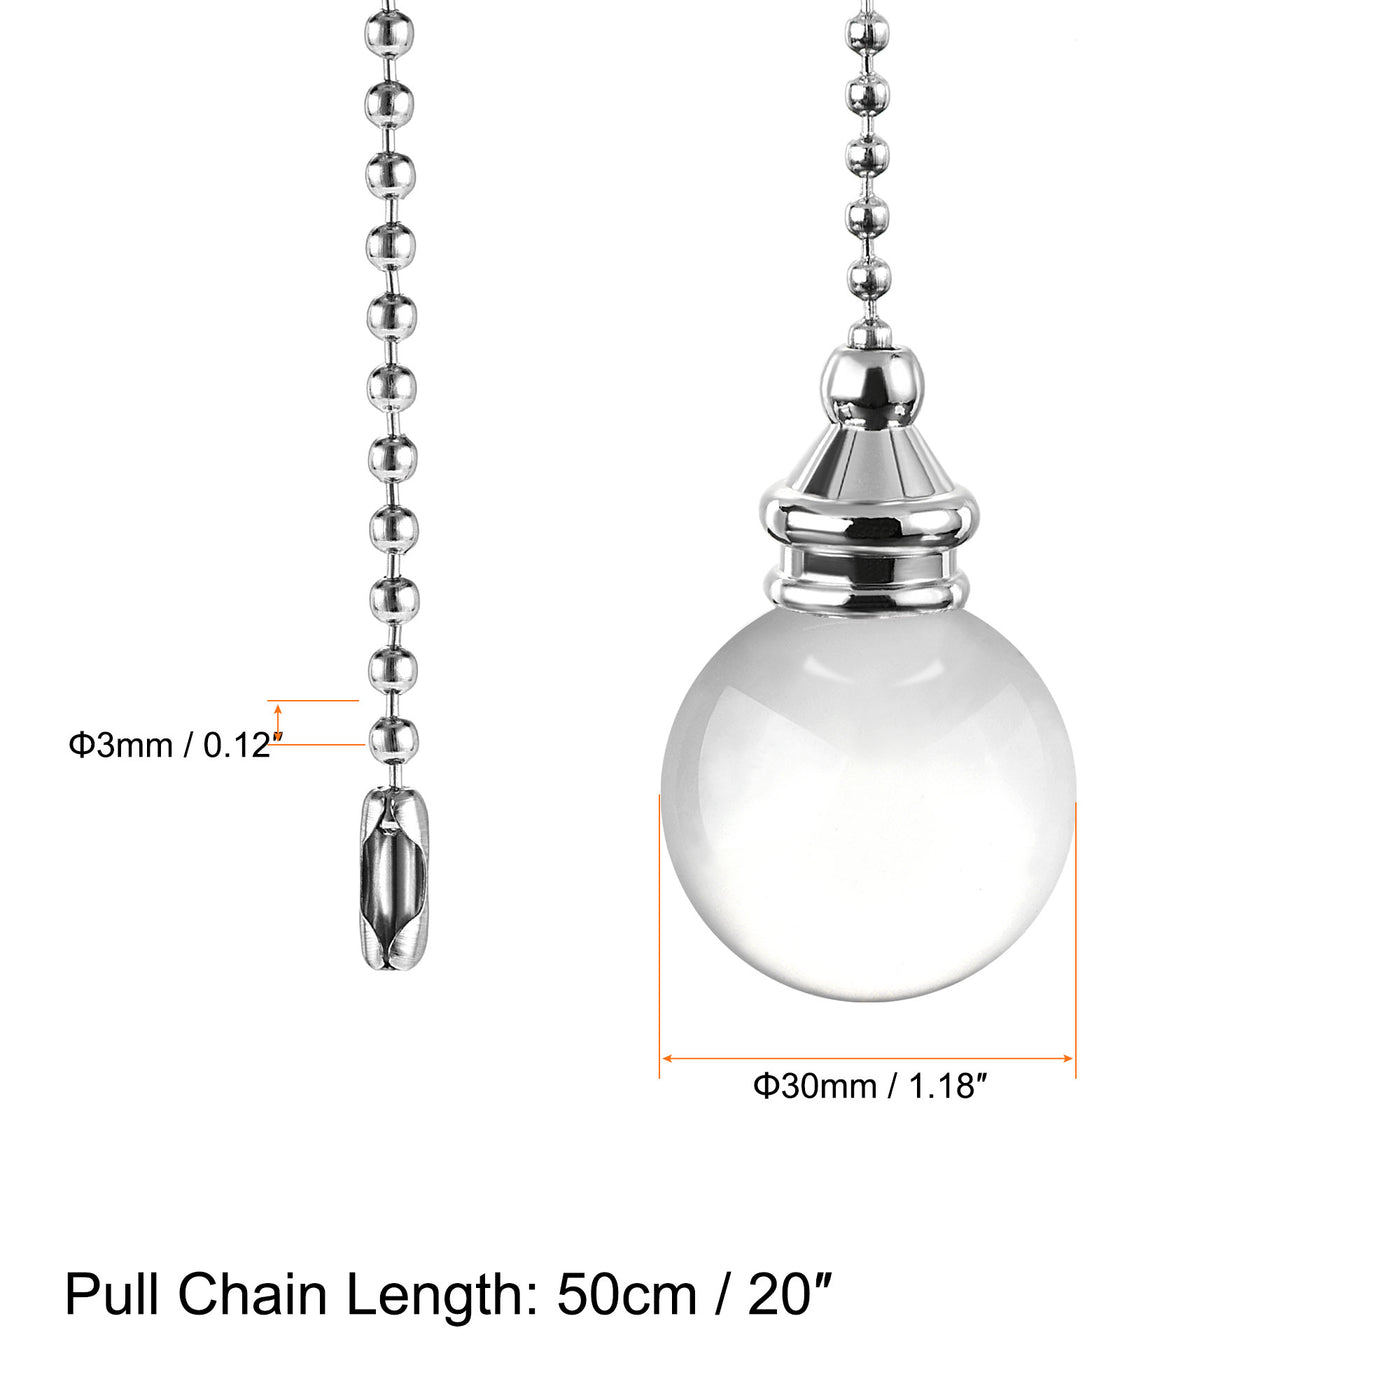 uxcell Uxcell Ceiling Fan Pull Chain, 20 Inch Fan Pull Chain Ornament Extension Lighting Accessories, 30mm Crystal Ball Pendant, Clear